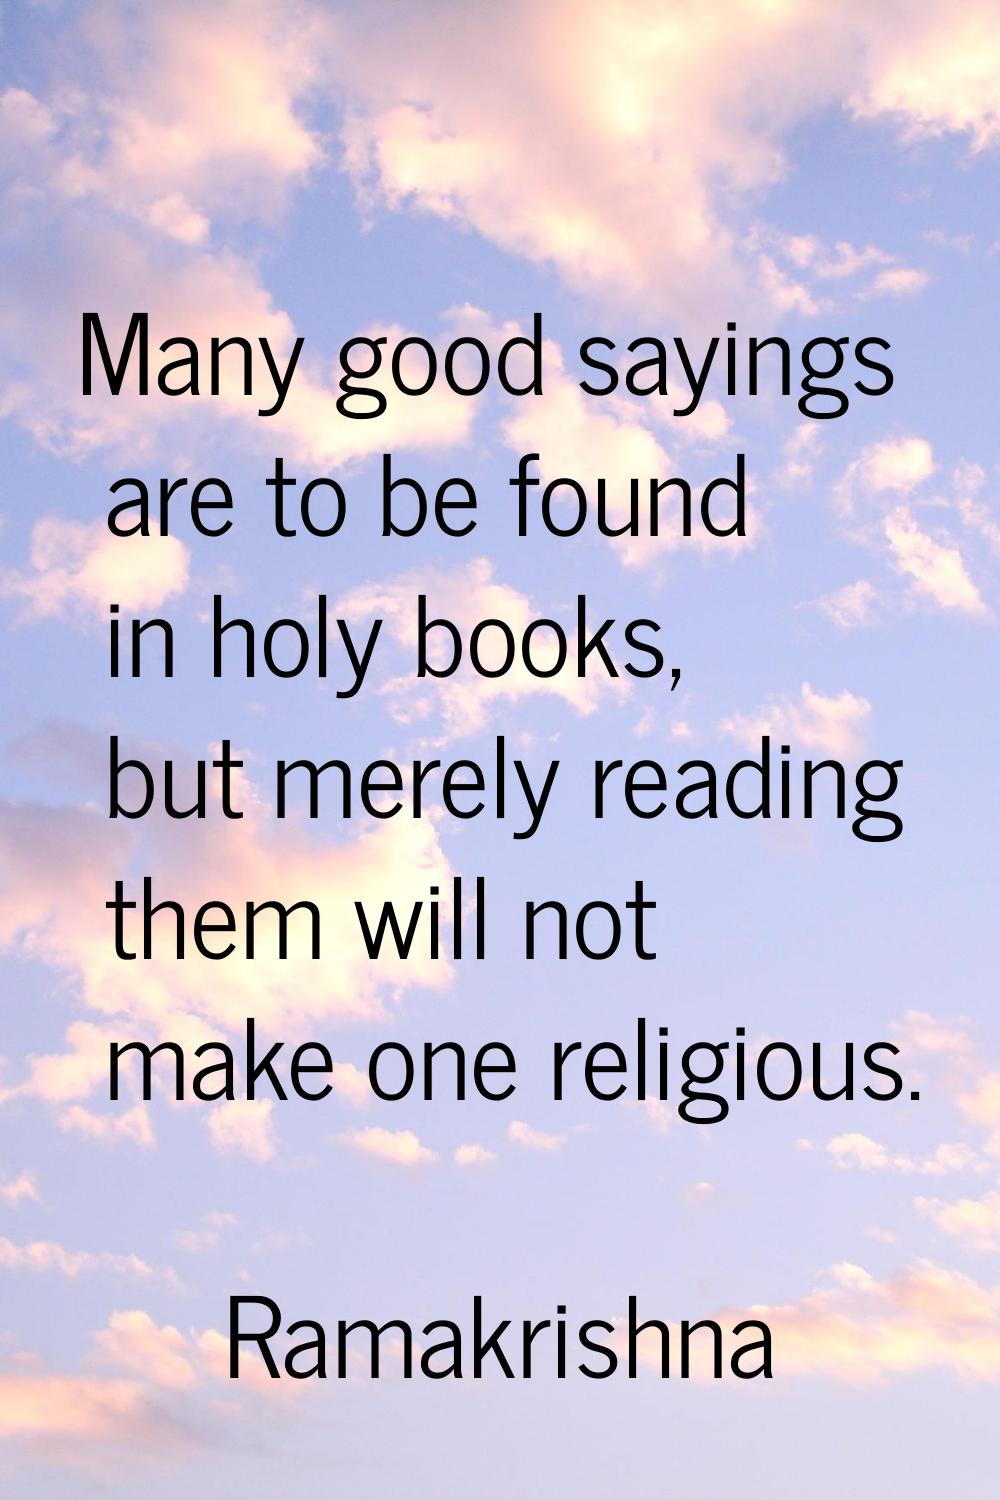 Many good sayings are to be found in holy books, but merely reading them will not make one religiou